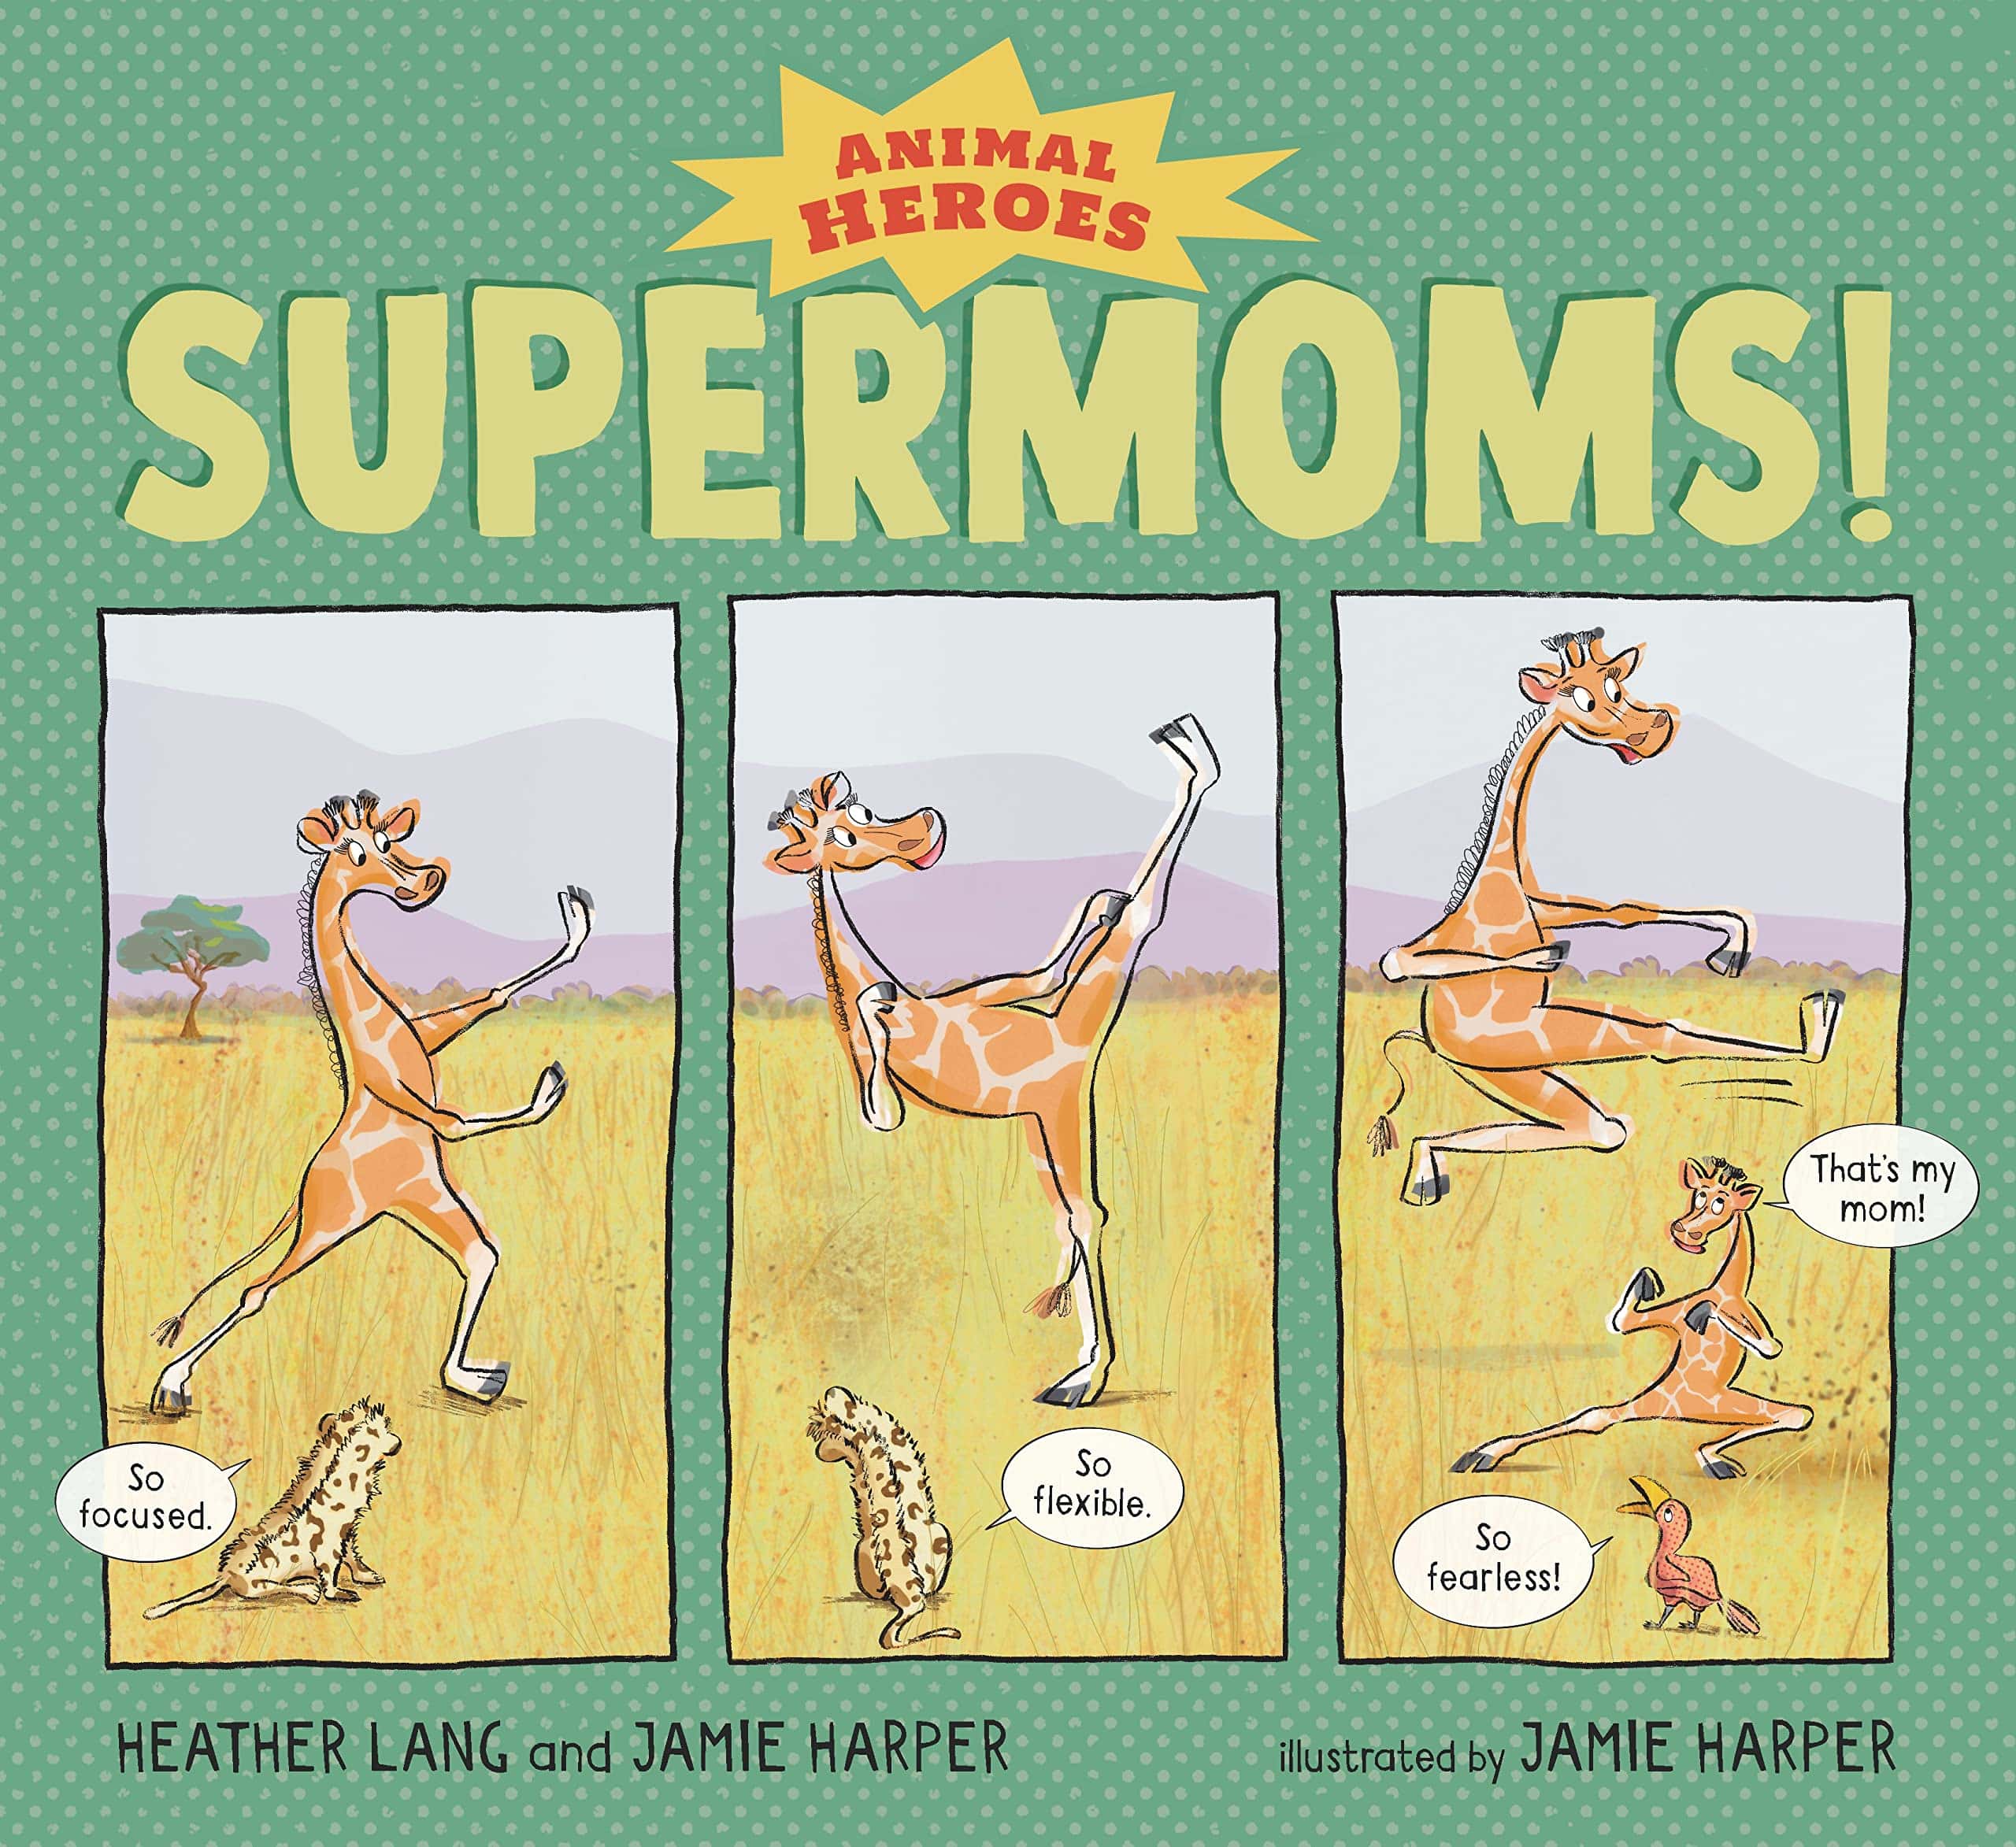 "Supermoms!: Animal Heroes" Book Cover